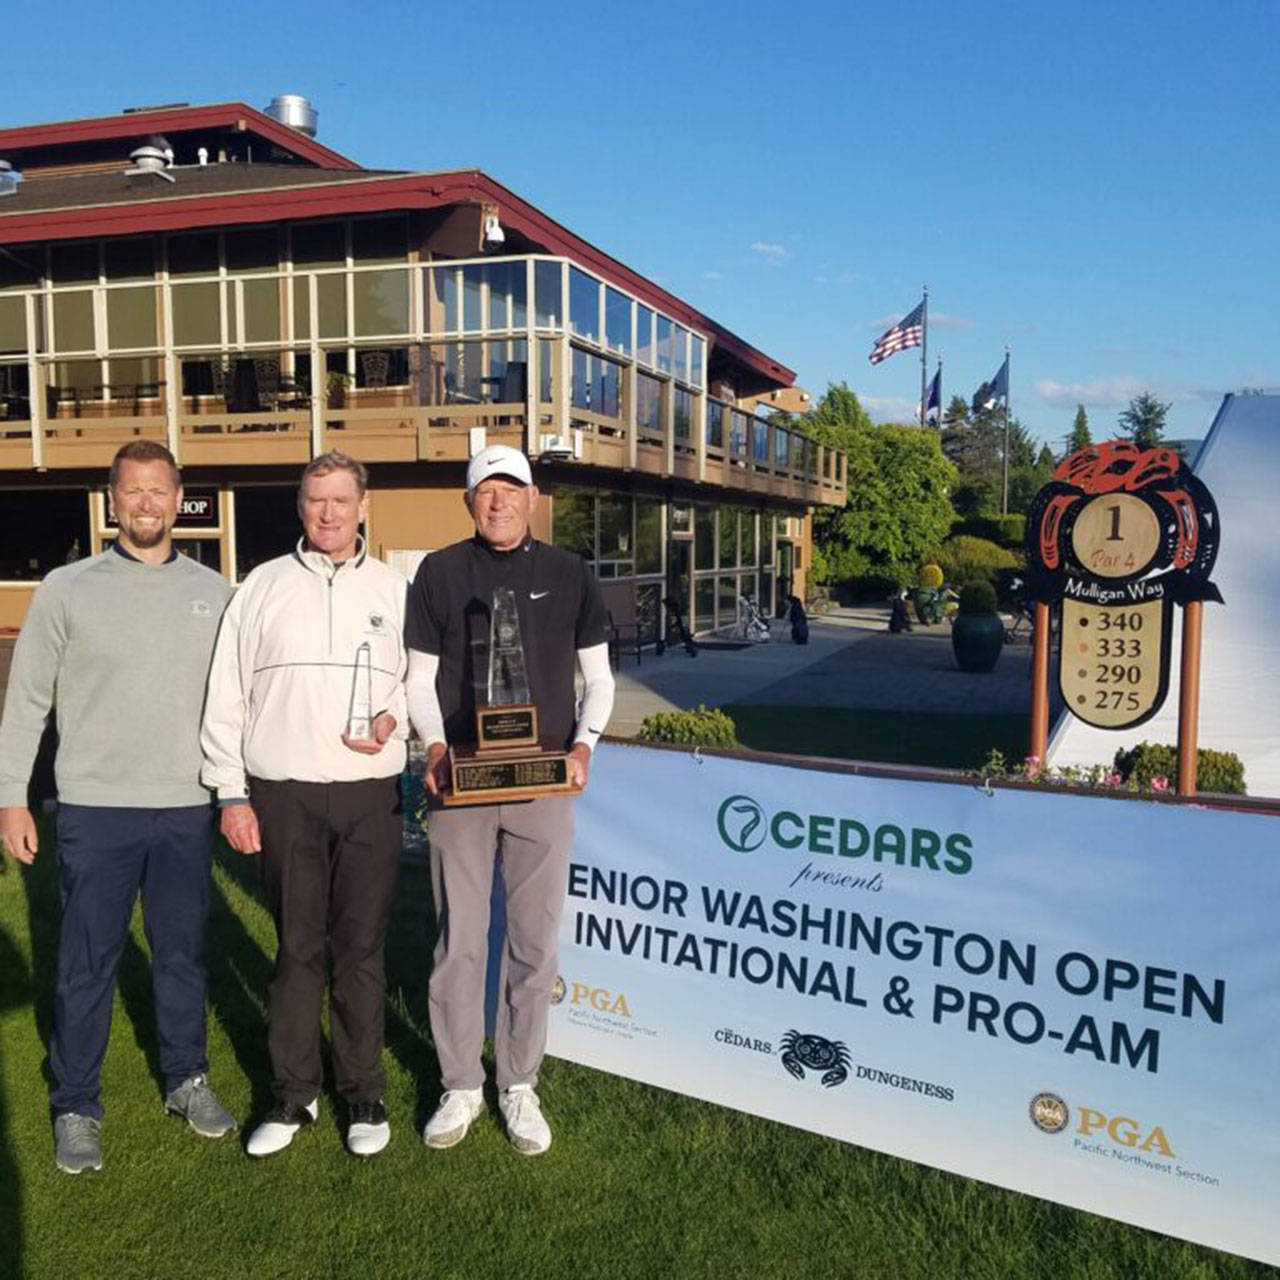 Jeff Coston, right, won the 7 Cedars Senior Washington Open held at The Cedars at Dungeness in Sequim for the 11th time. Coston is joined by Chad Wagner, director of golf at The Cedars at Dungeness, left, and amateur champion Tom Brandes. (Photo courtesy of Western Washington PGA)